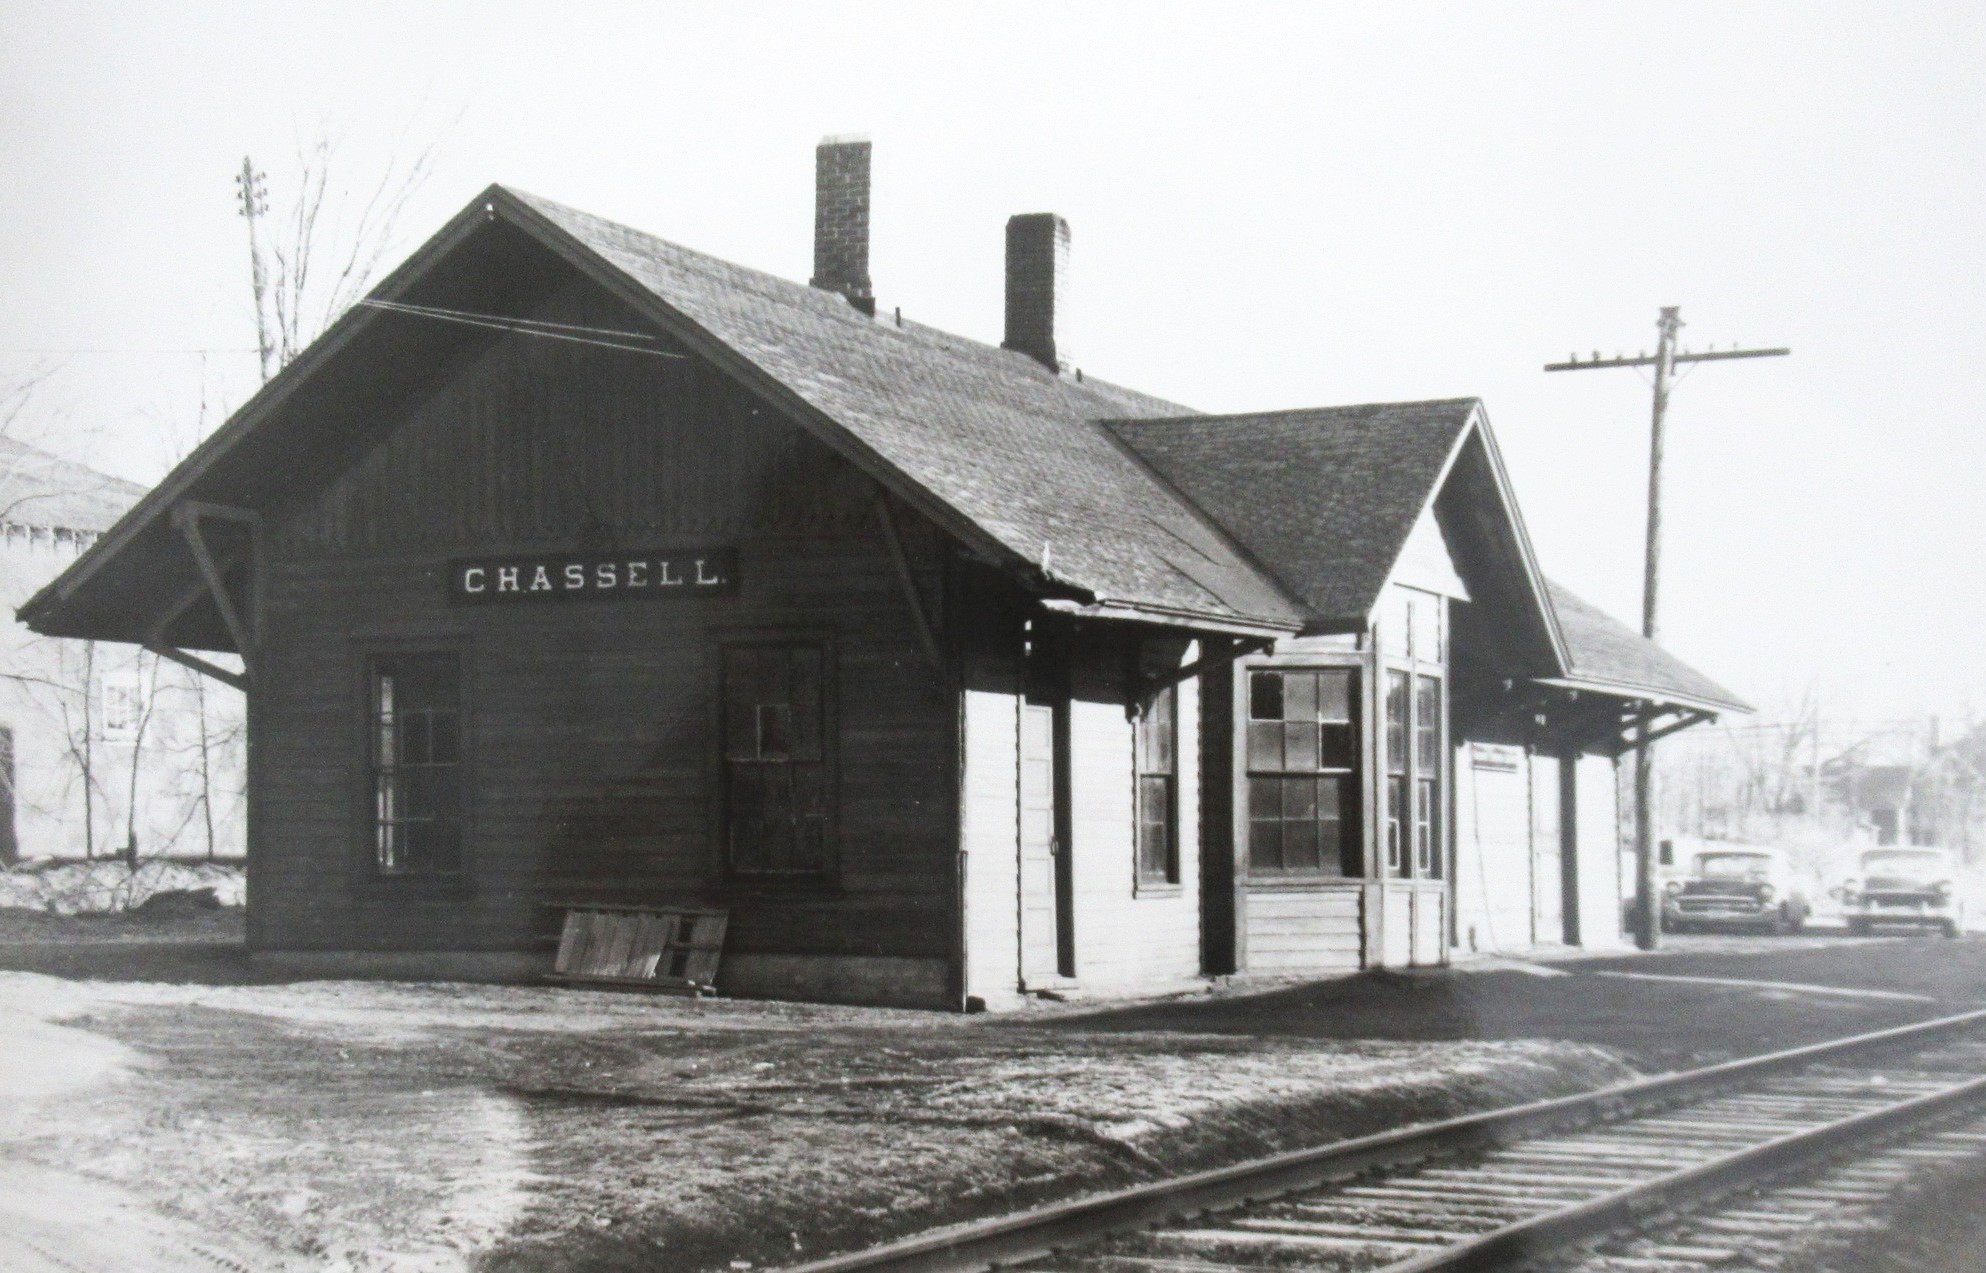 Chassell Depot in the 1950's